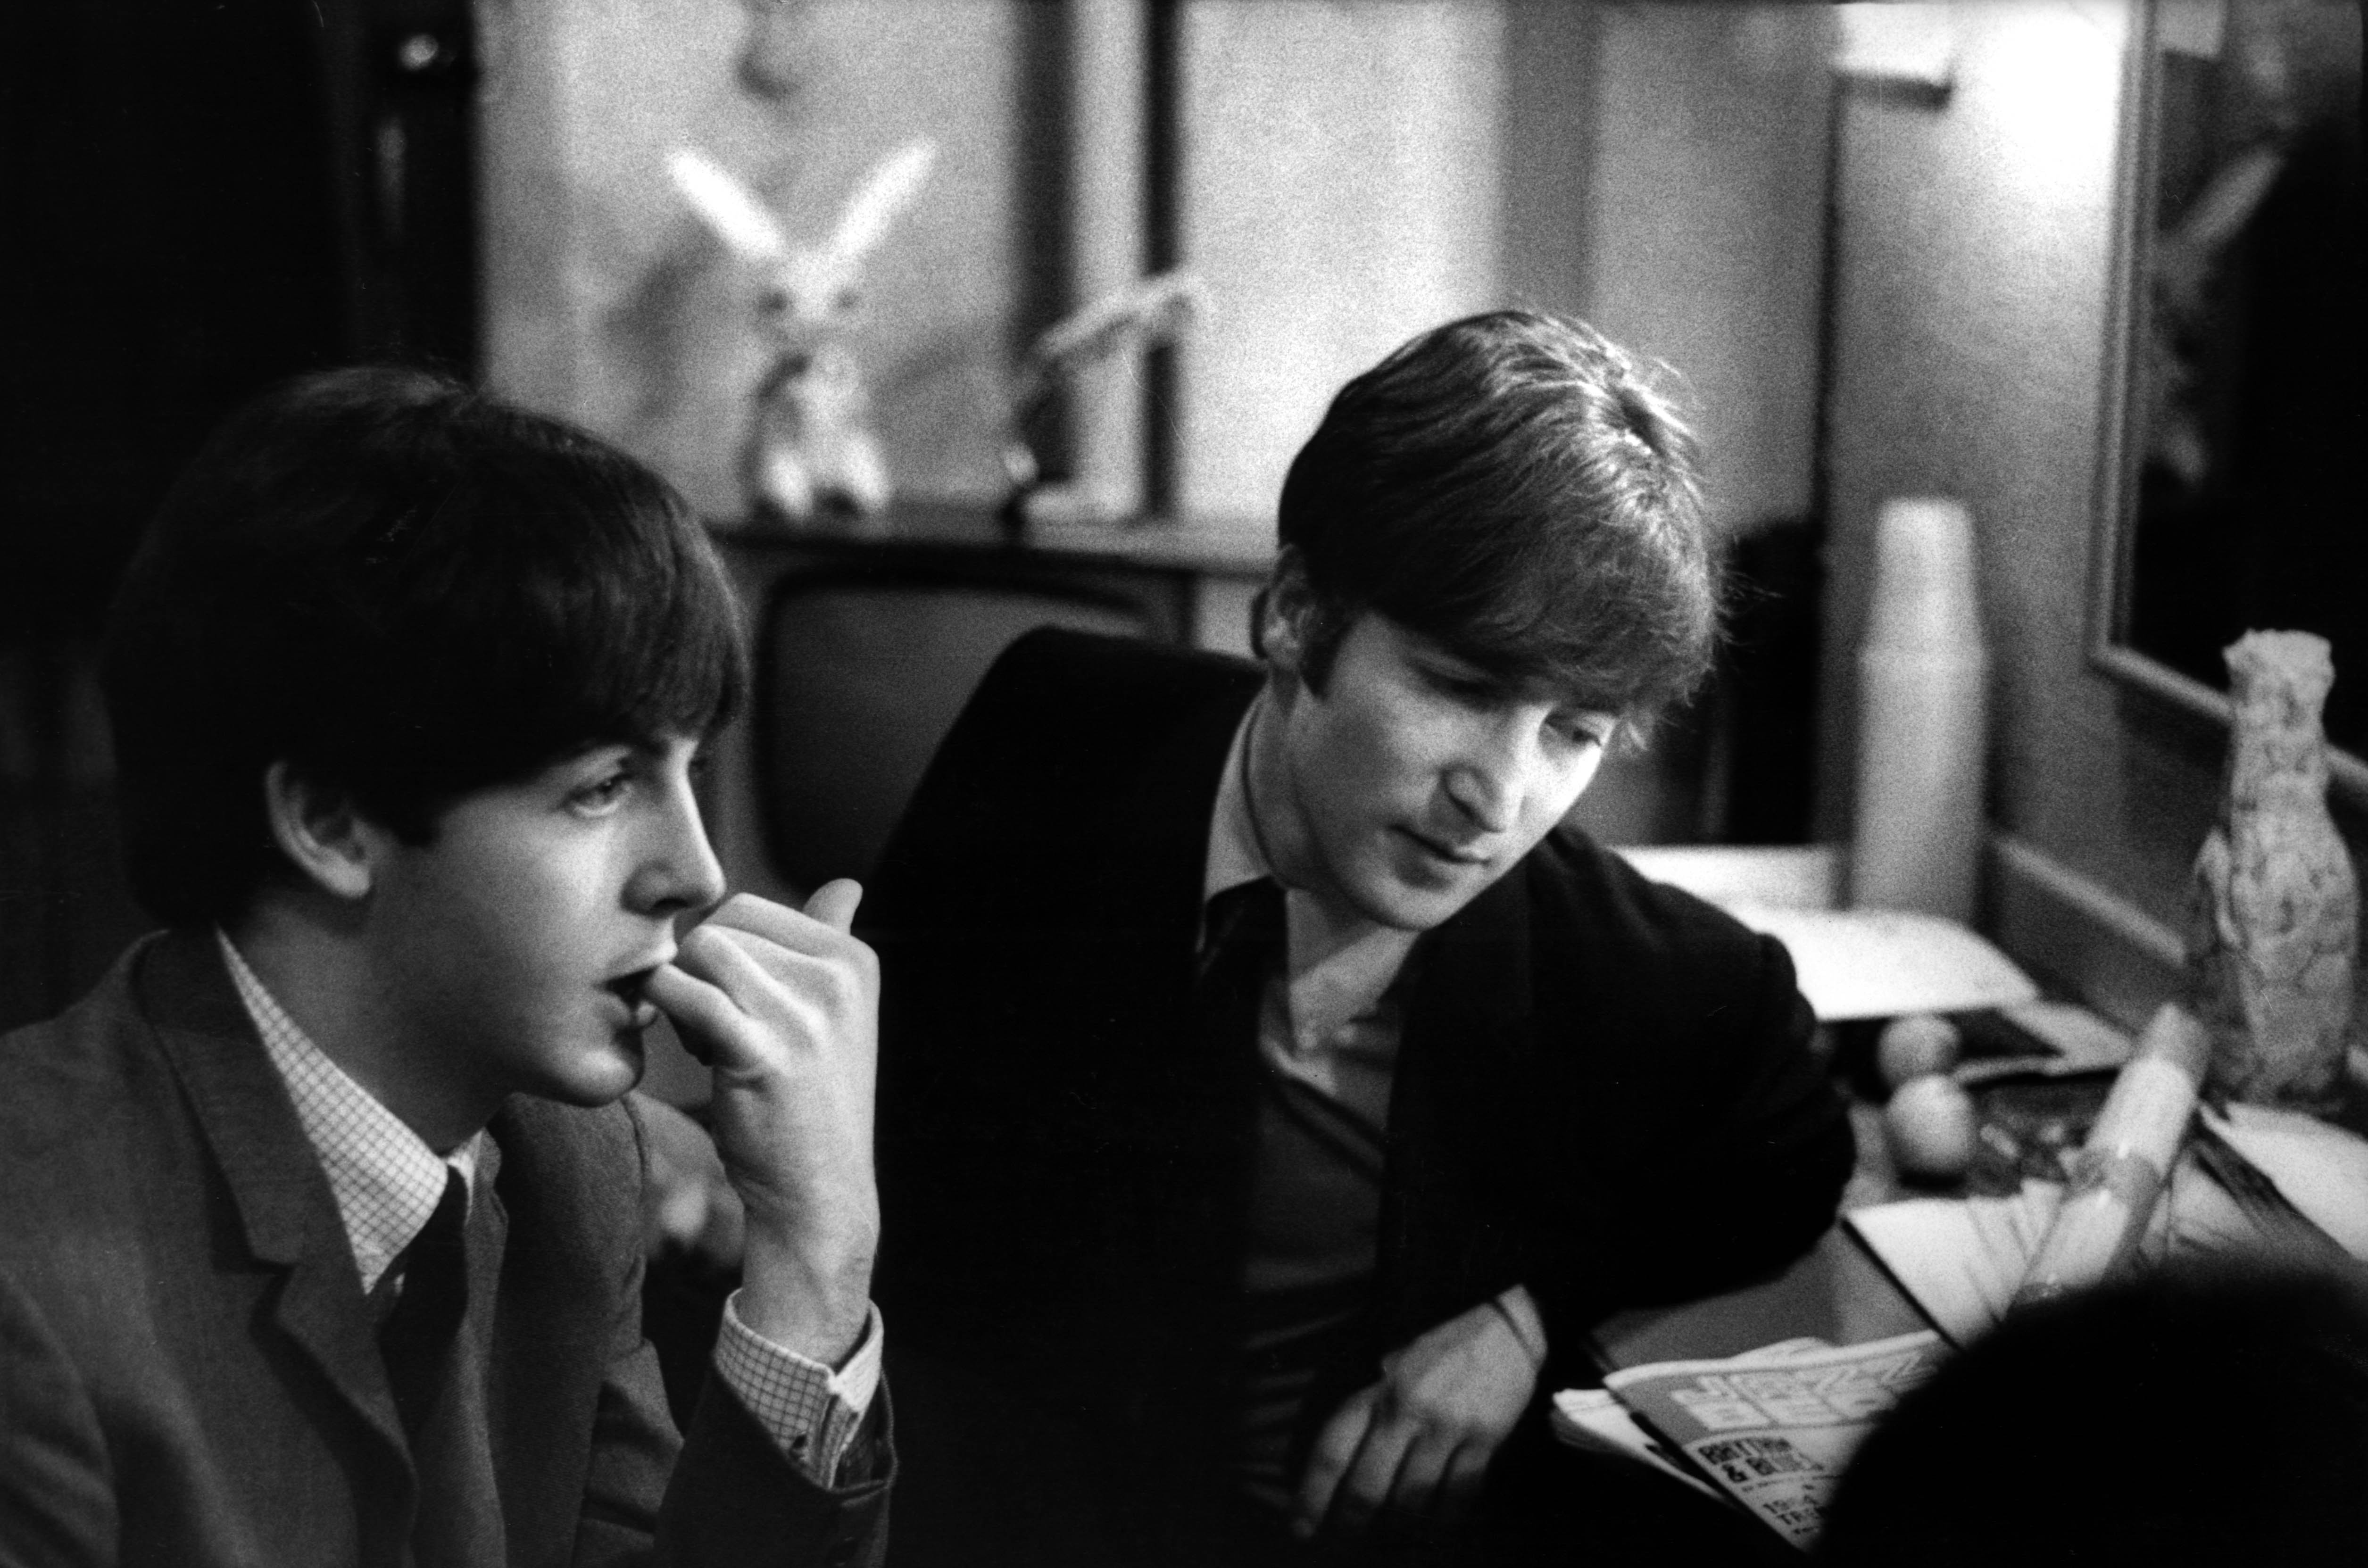 John Lennon and Paul McCartney caught in a candid black and white shot.